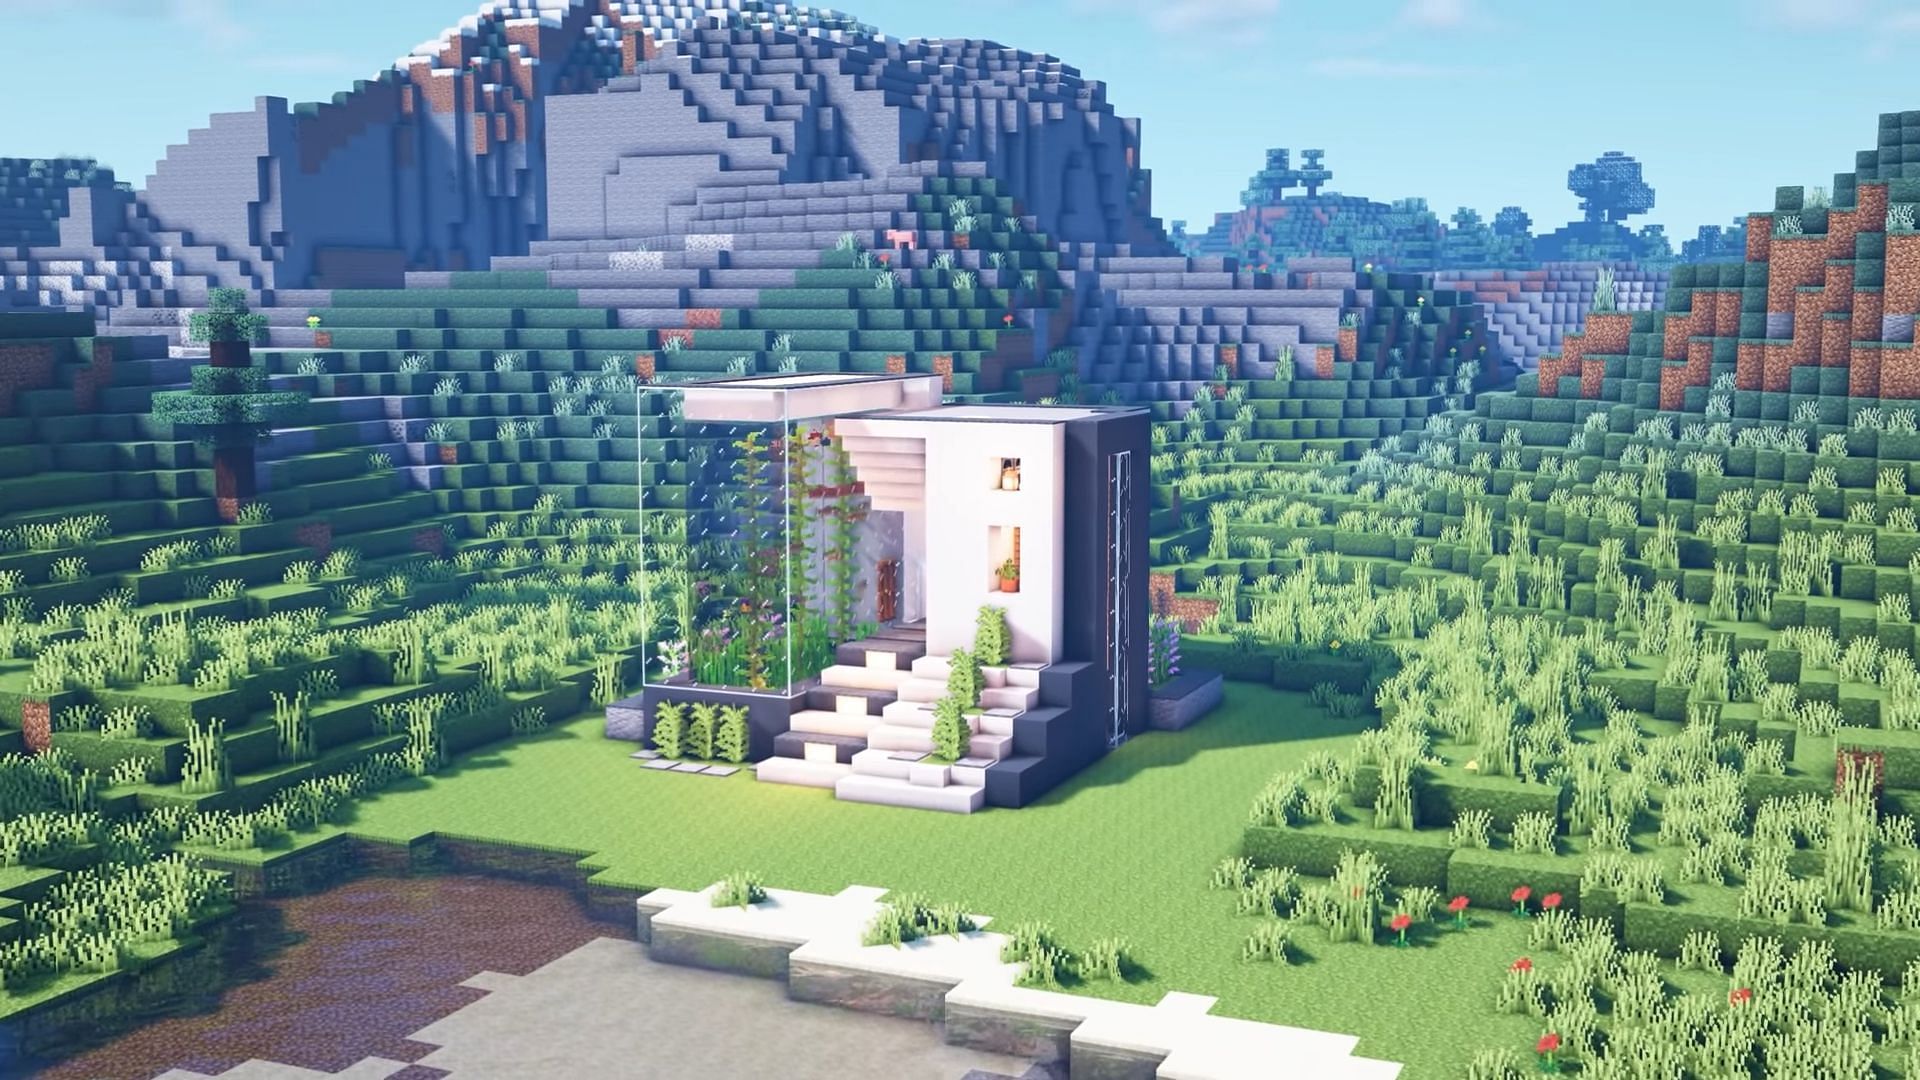 This Minecraft house has a magnificent aquarium on its exterior (Image via SheepGG/YouTube)